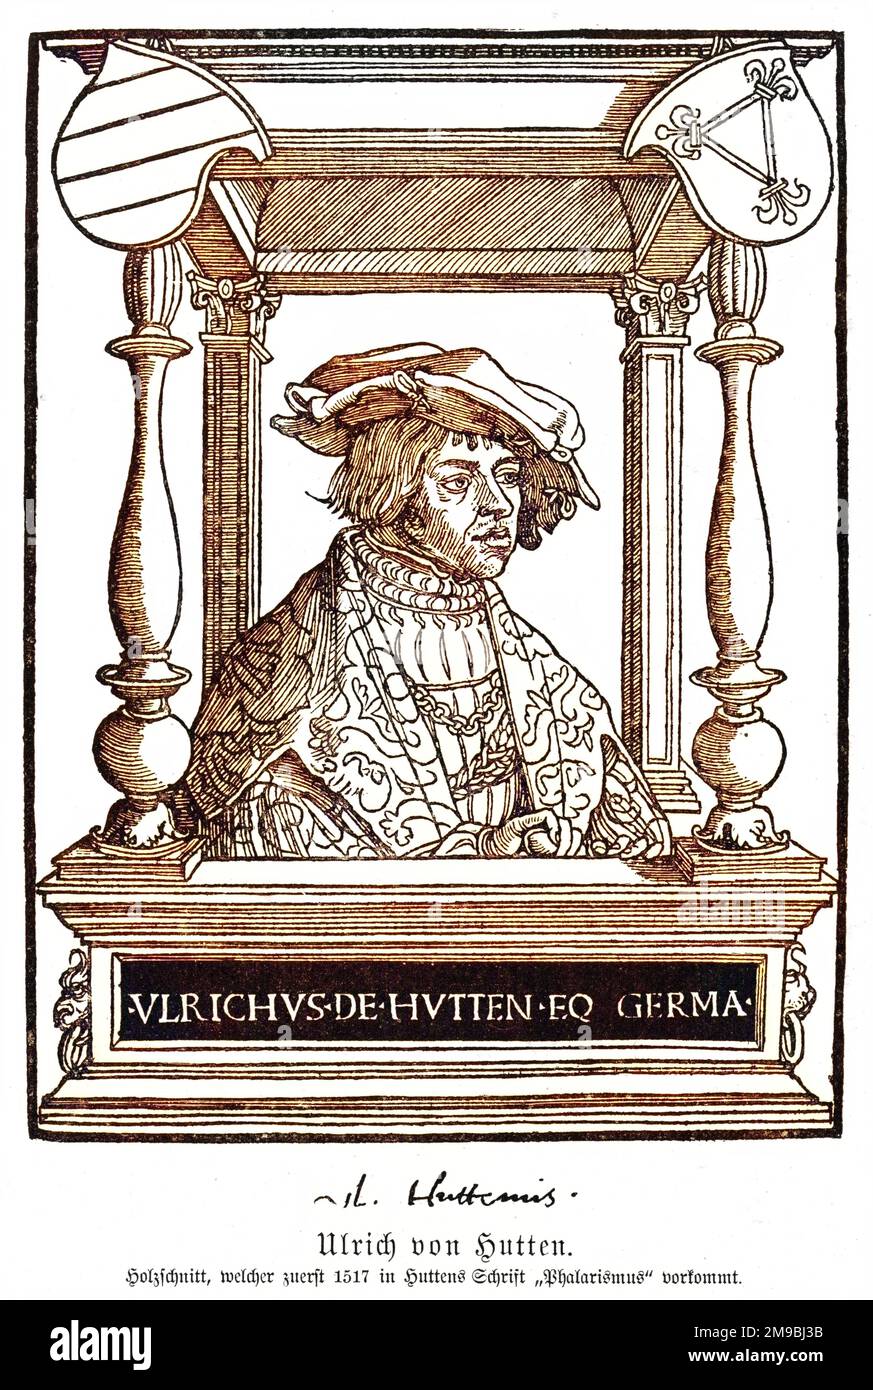 ULRICH VON HUTTEN German protestant leader, humanist and friend of Luther. Stock Photo